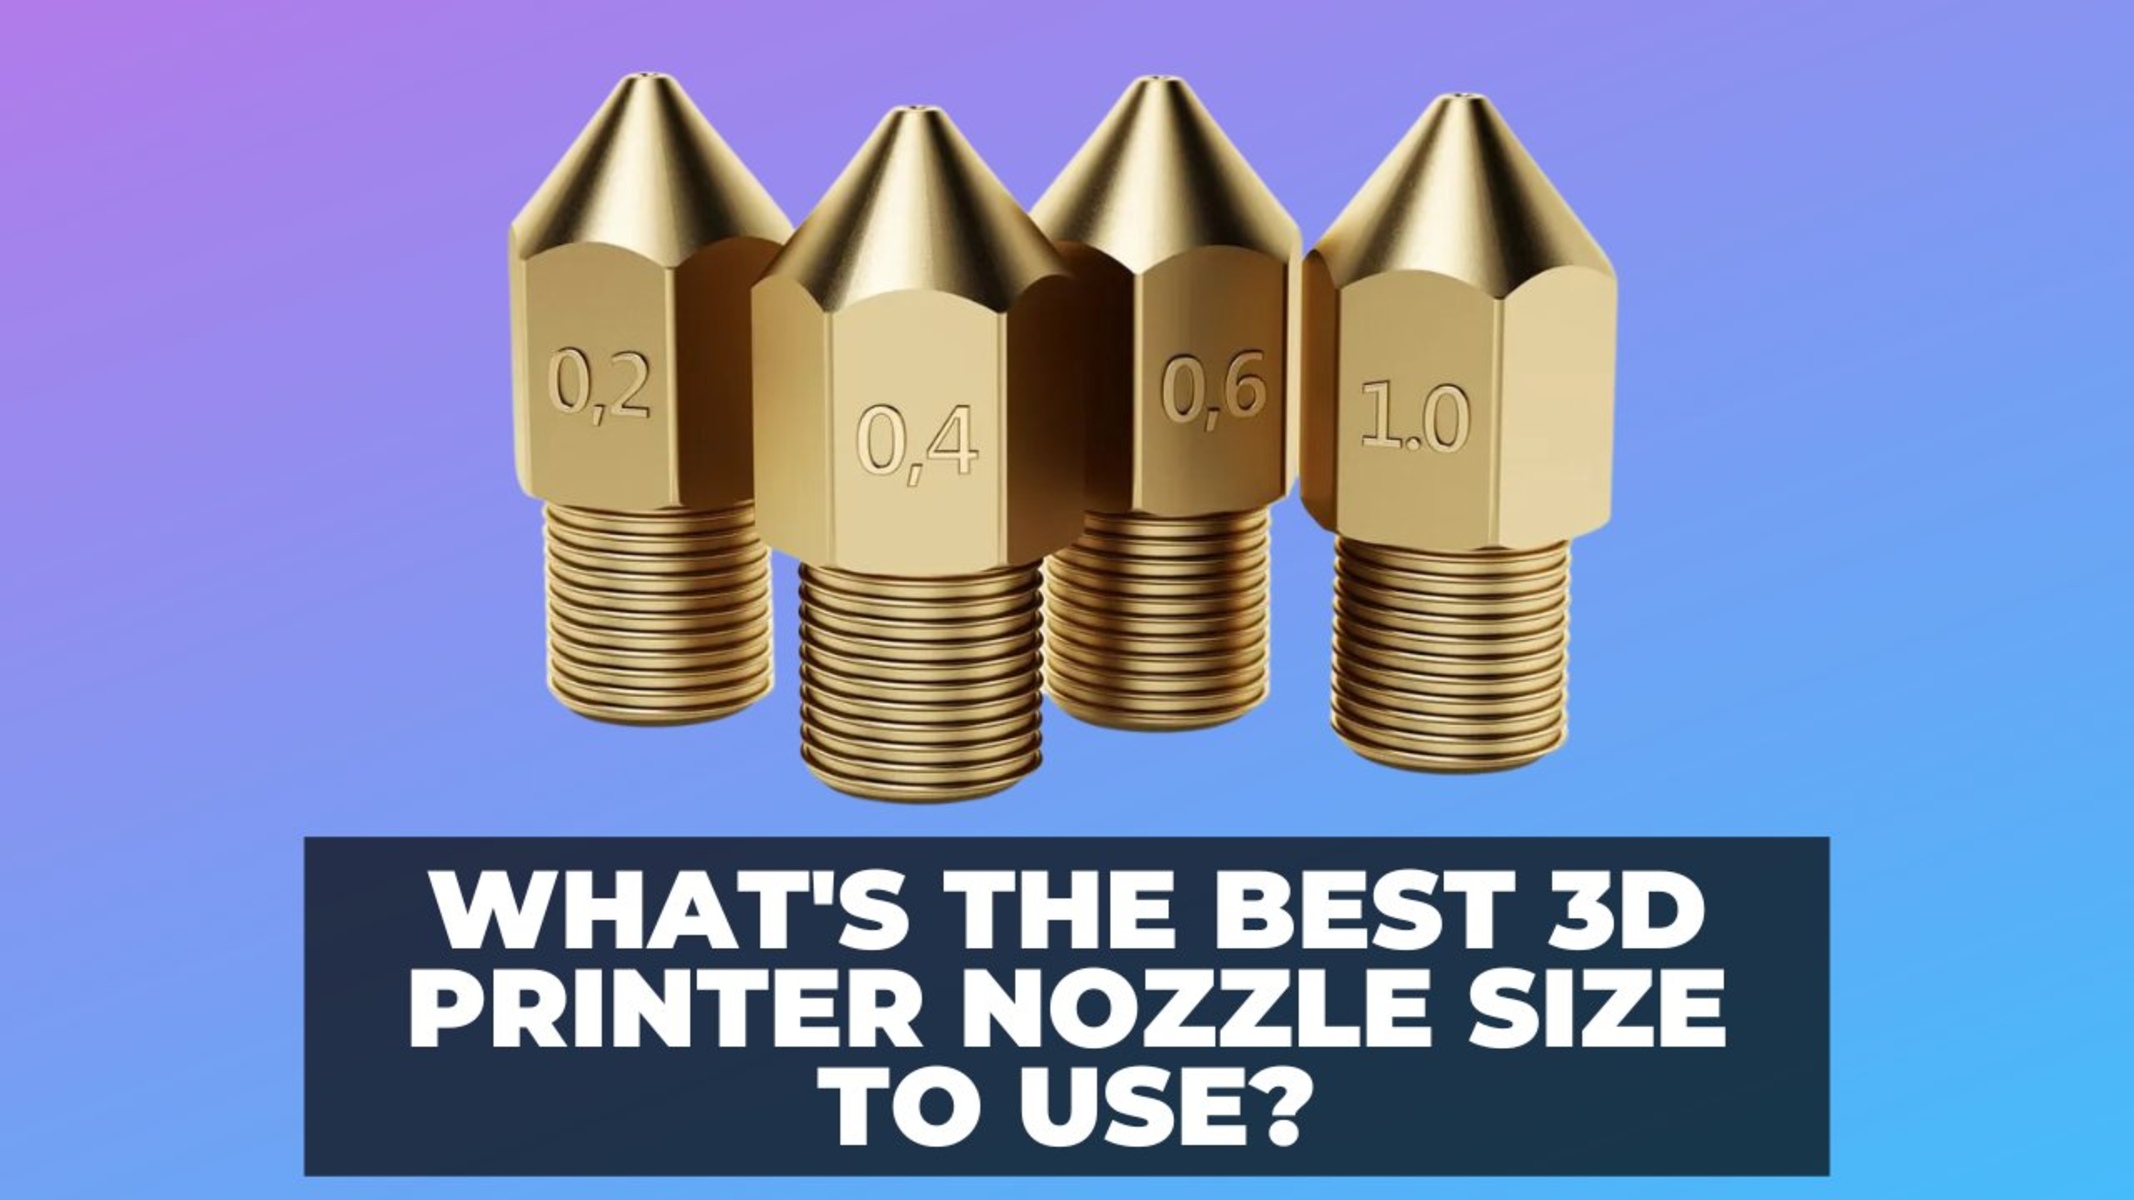 What Size Nozzle Is Best For 3D Printing